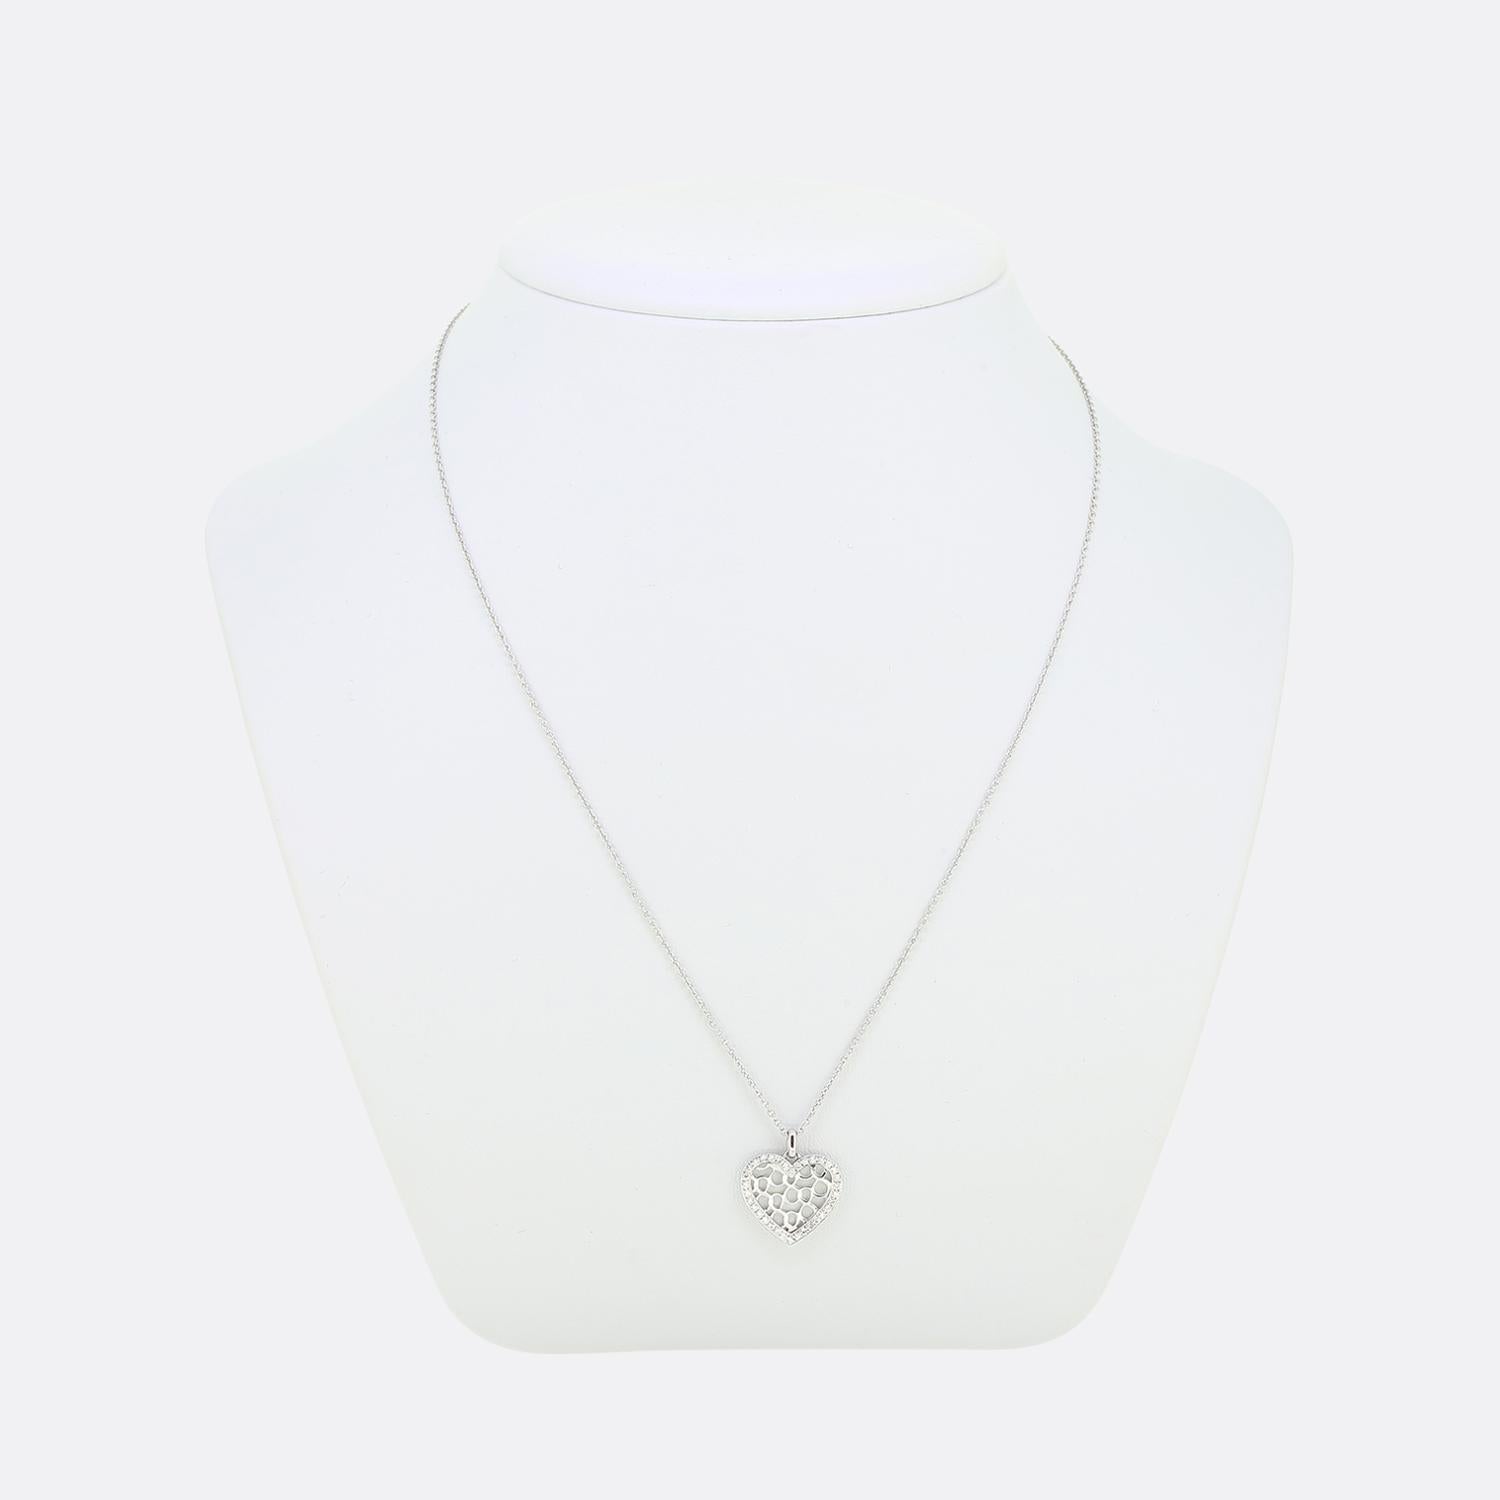 Here we have a wonderful diamond necklace from Bucherer. This piece has been crafted from 18ct white gold and showcases a love heart design with multiple openings at the centre. This romantic pendant is then accentuated by a frame of round brilliant